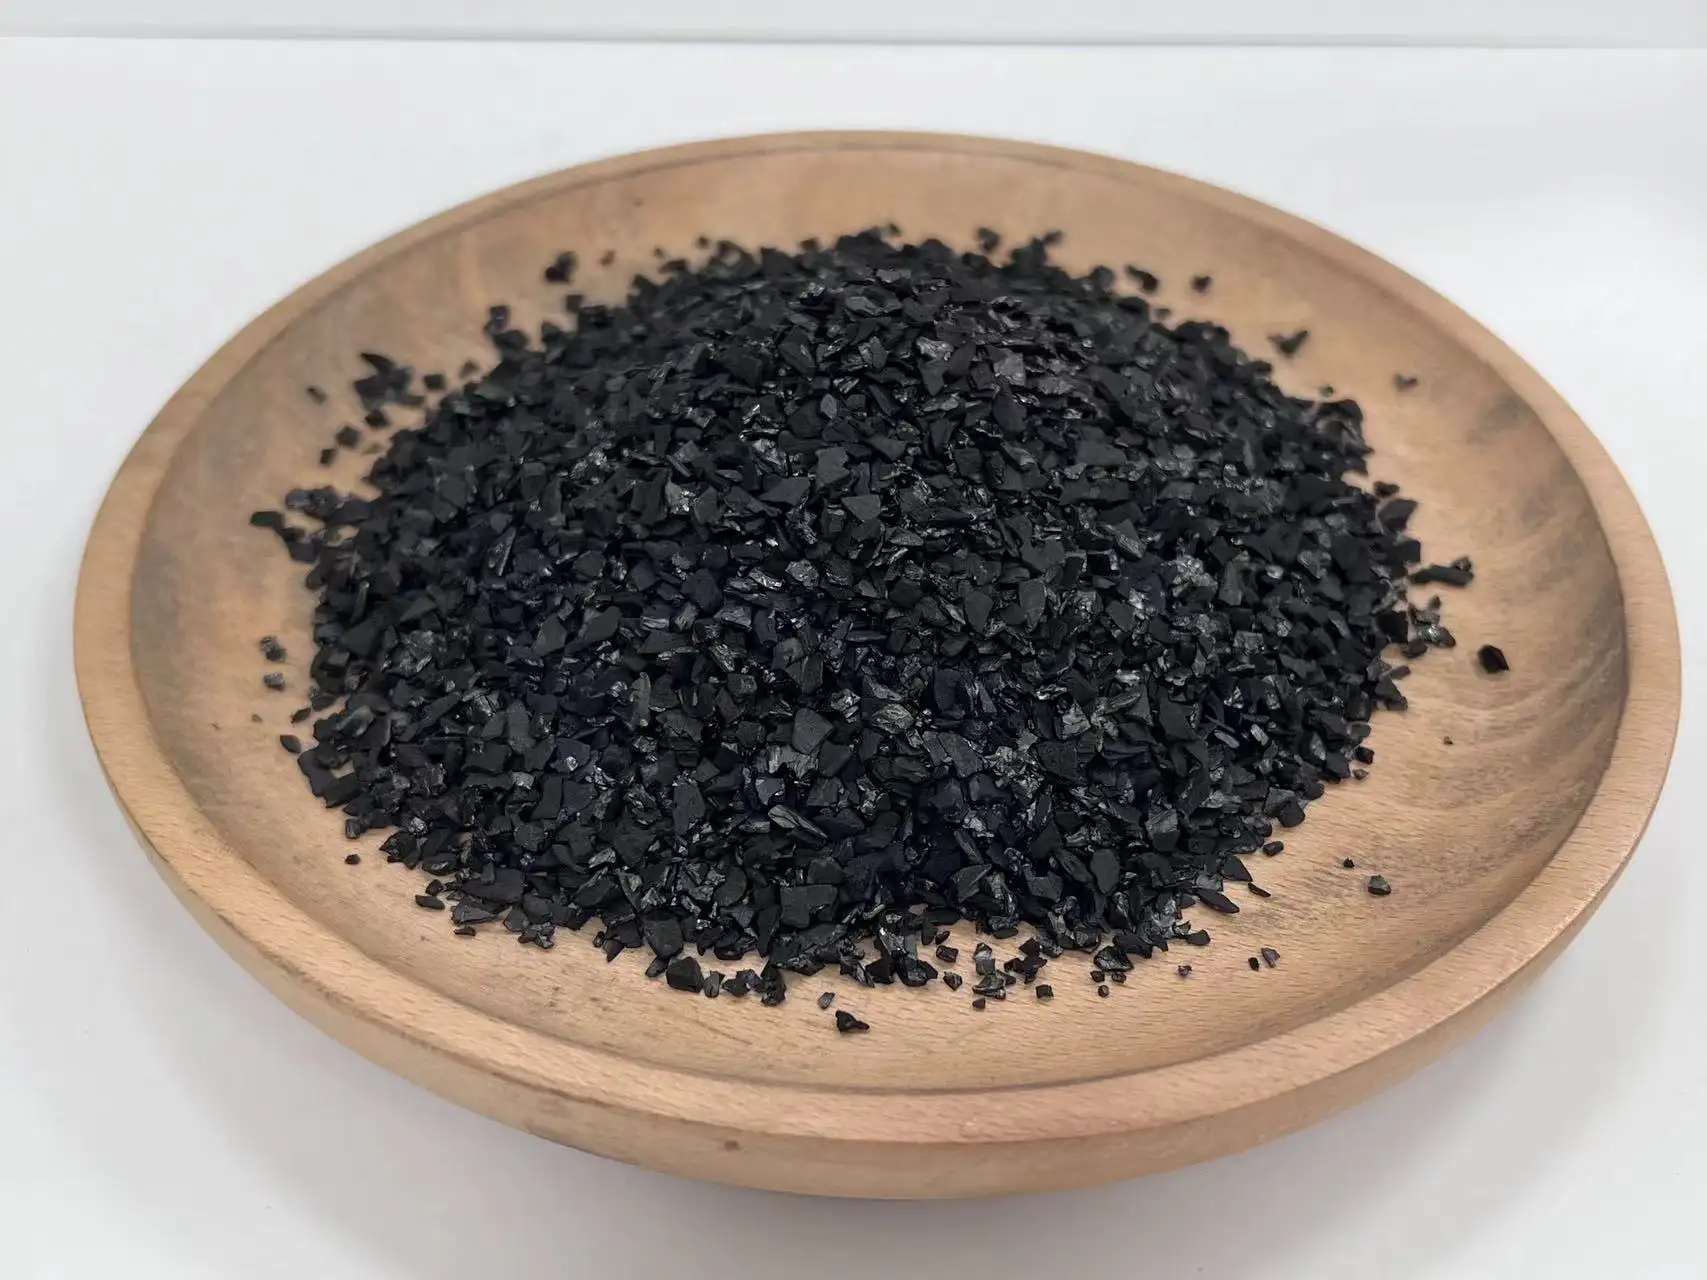 Coconut shell activated carbon particles for decolorizing wastewater treatment and gas treatment have excellent effect